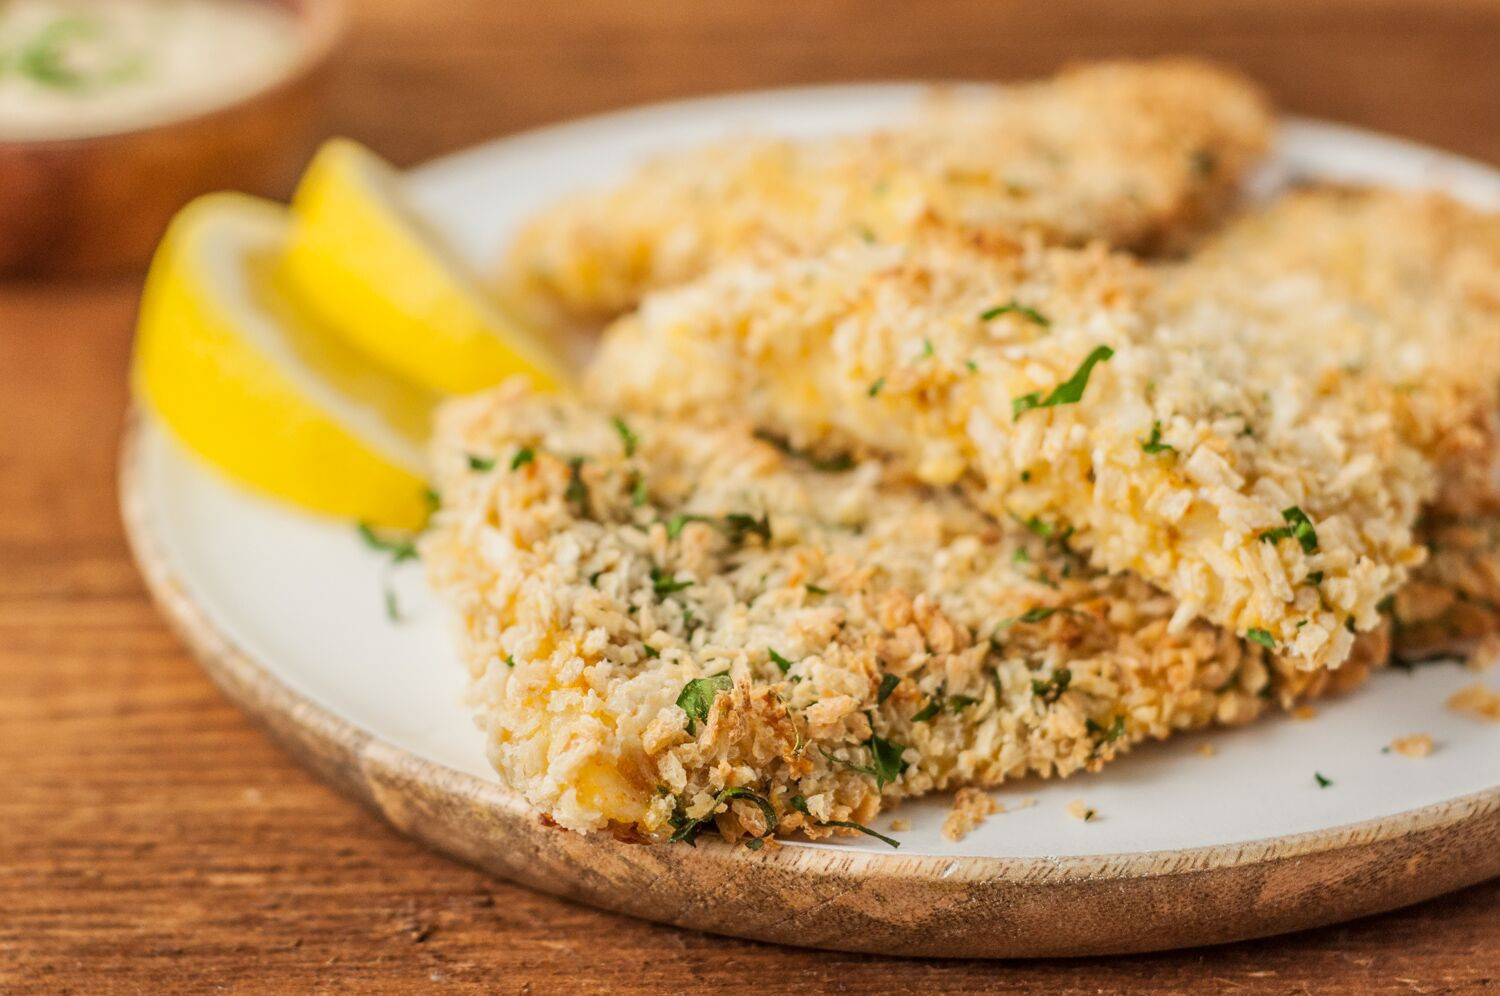 Recipes For Baking Fish Fillets
 Baked Panko Crusted Fish Fillets Recipe